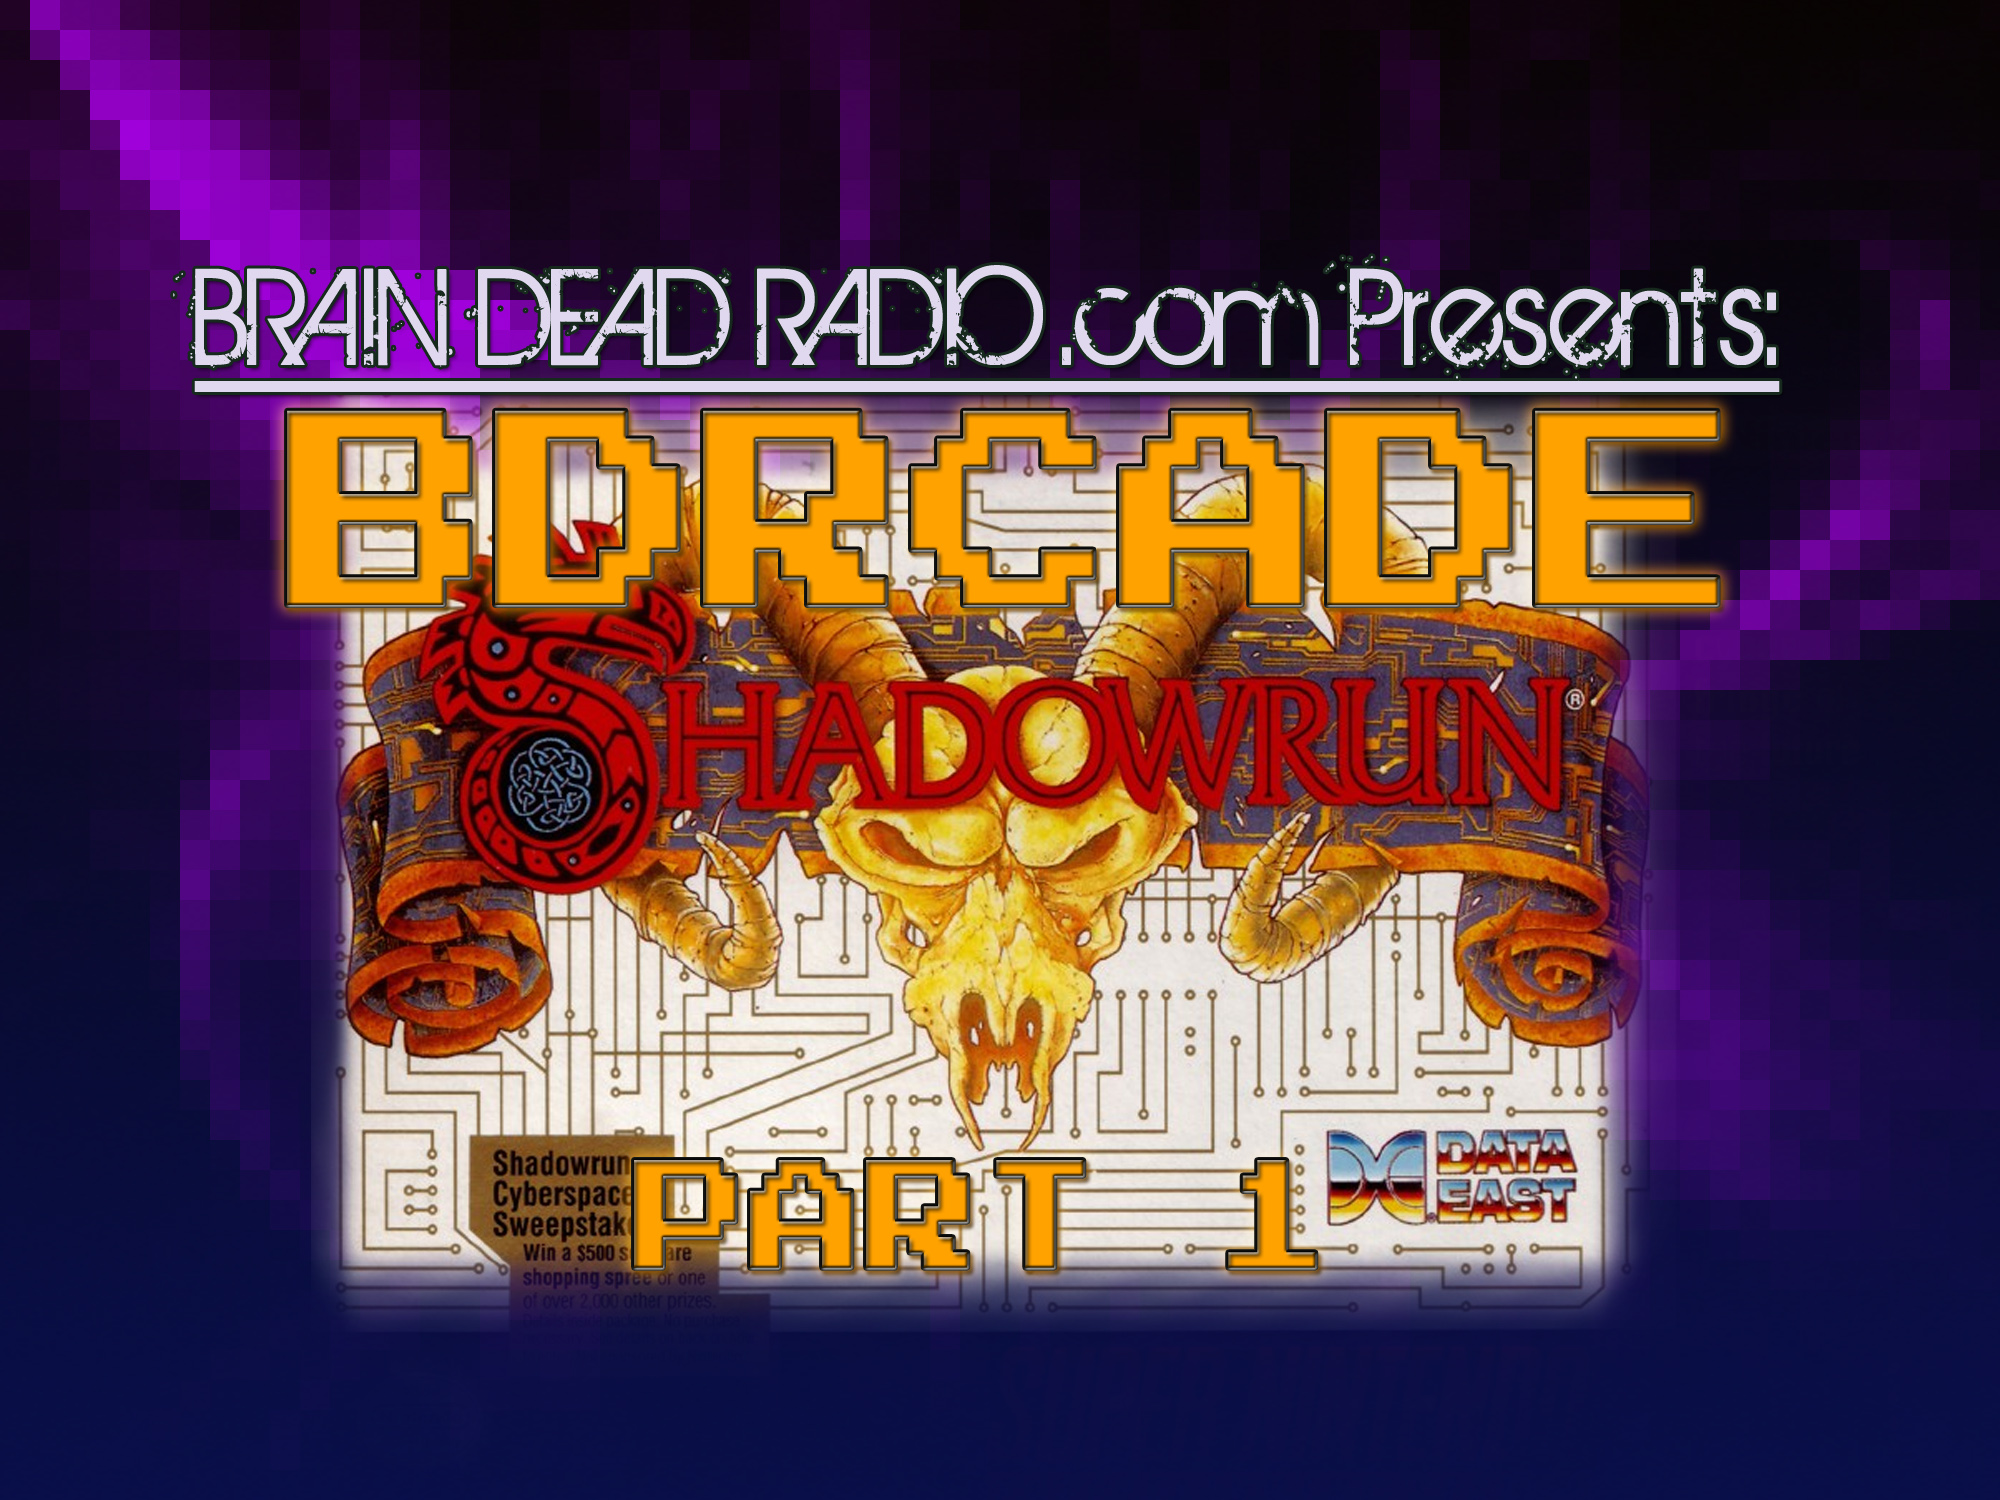 Shadowrun – Part 1 – “Hey ma! I’m running in shadows over here!” – BDRcade